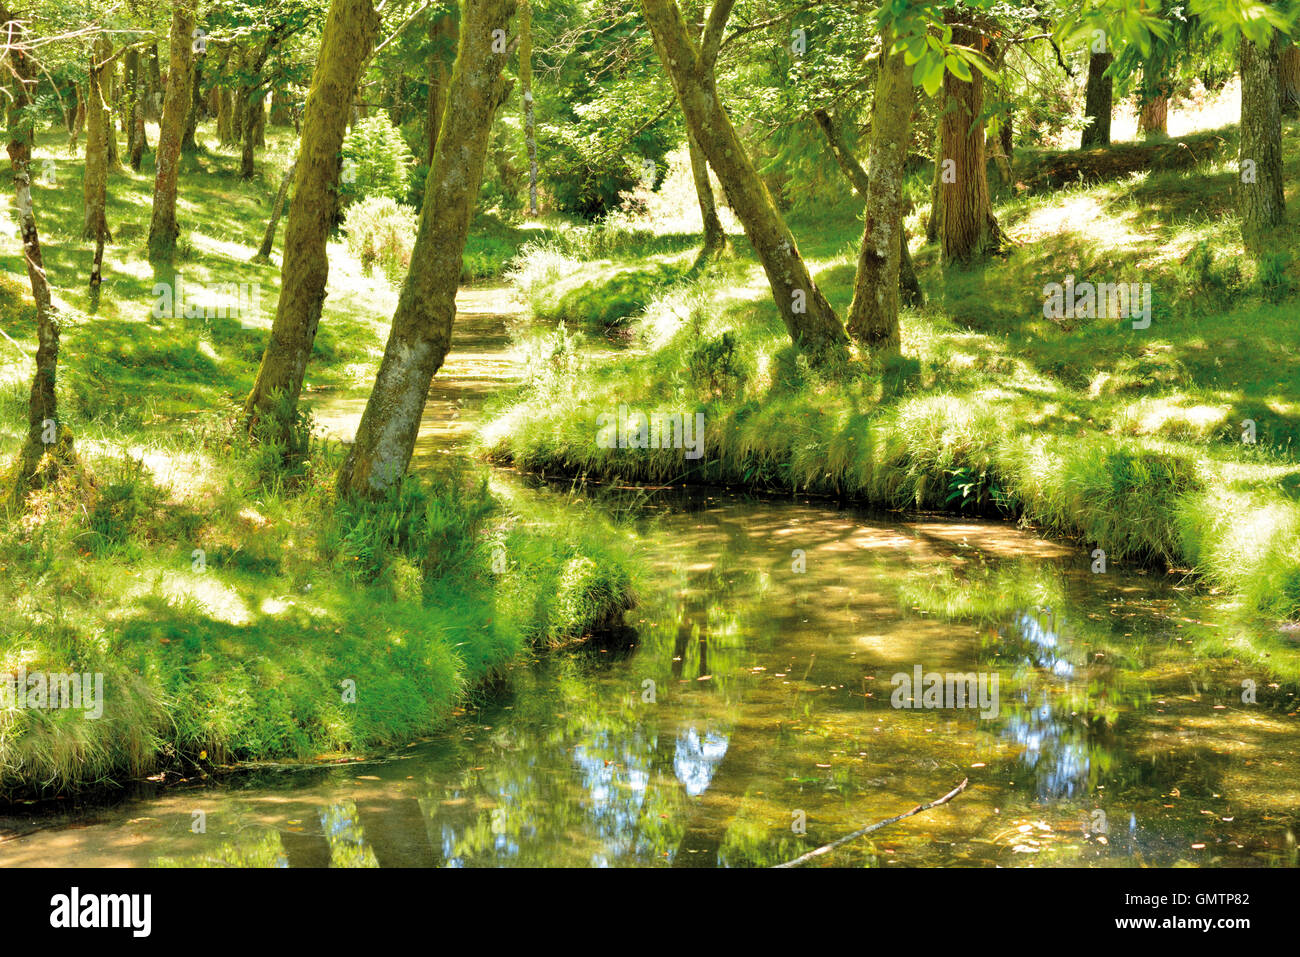 Portugal: Forest creek and oaks in the National Park Peneda Geres Stock Photo